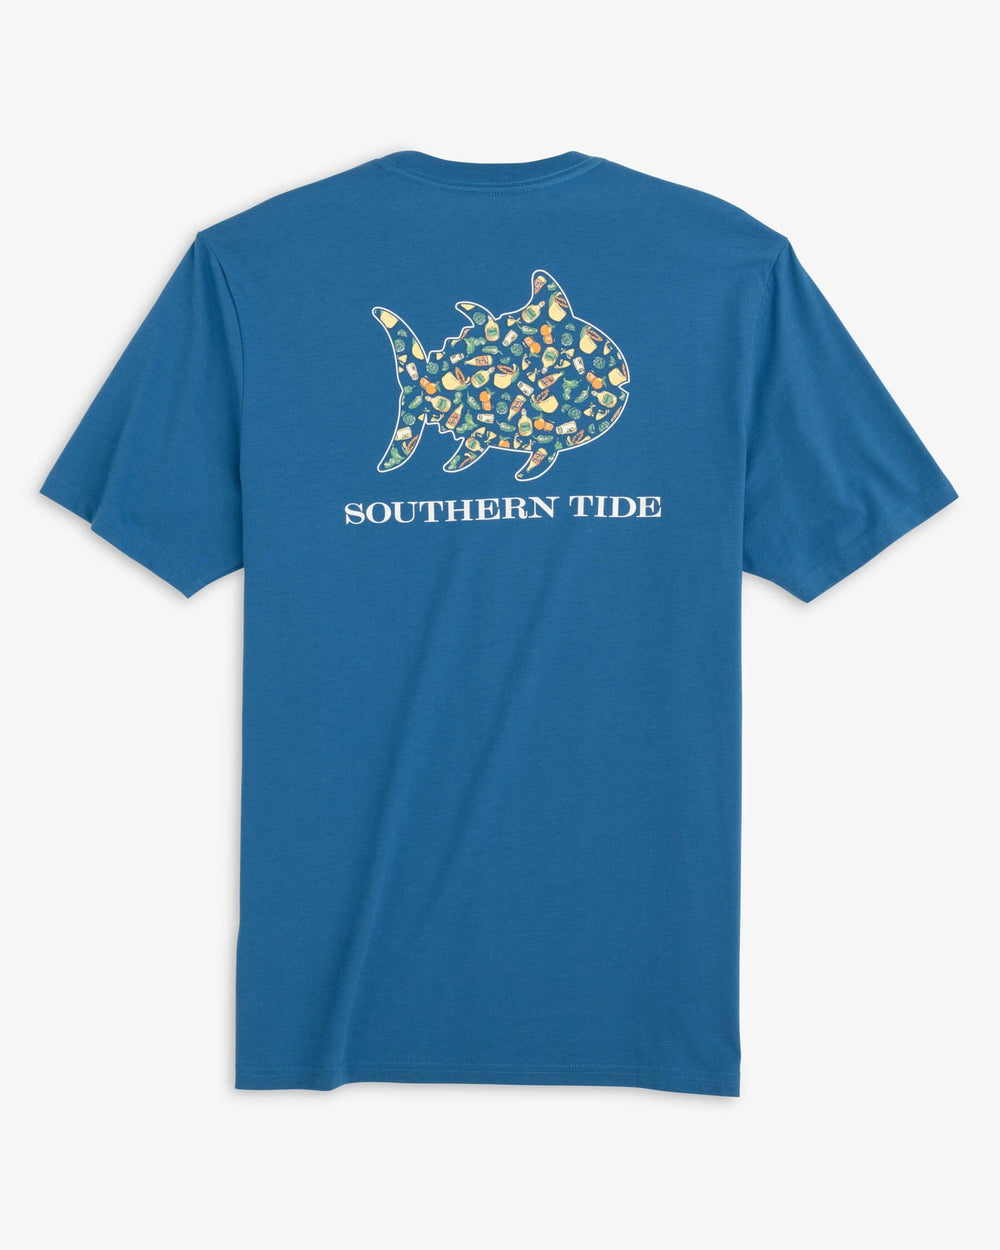 The back view of the Southern Tide Spicy Skipjack T-Shirt by Southern Tide - Atlantic Blue